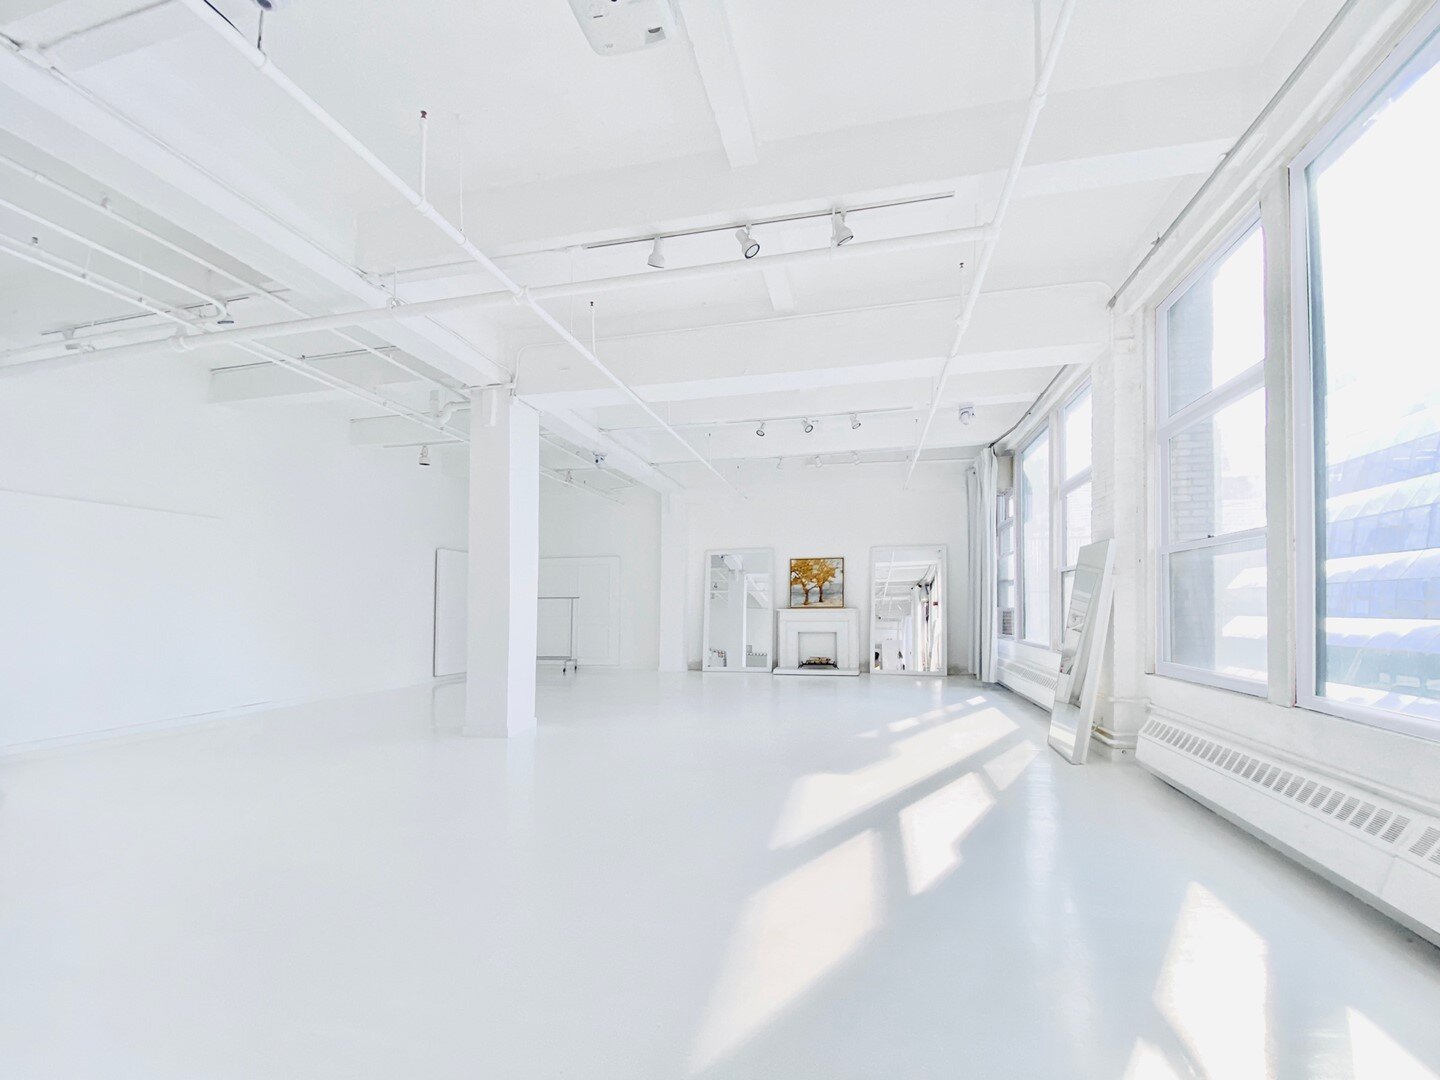 Offering 2,300 SF, Loft 9 is a perfect space for photo and film productions, events and private parties⁠
.⁠
.⁠
.⁠
#shotatdaylight #daylightstudio #photostudio #studiophoto #photographystudio #nycphotostudio #photoshoot #photostudionyc #videostudio #s